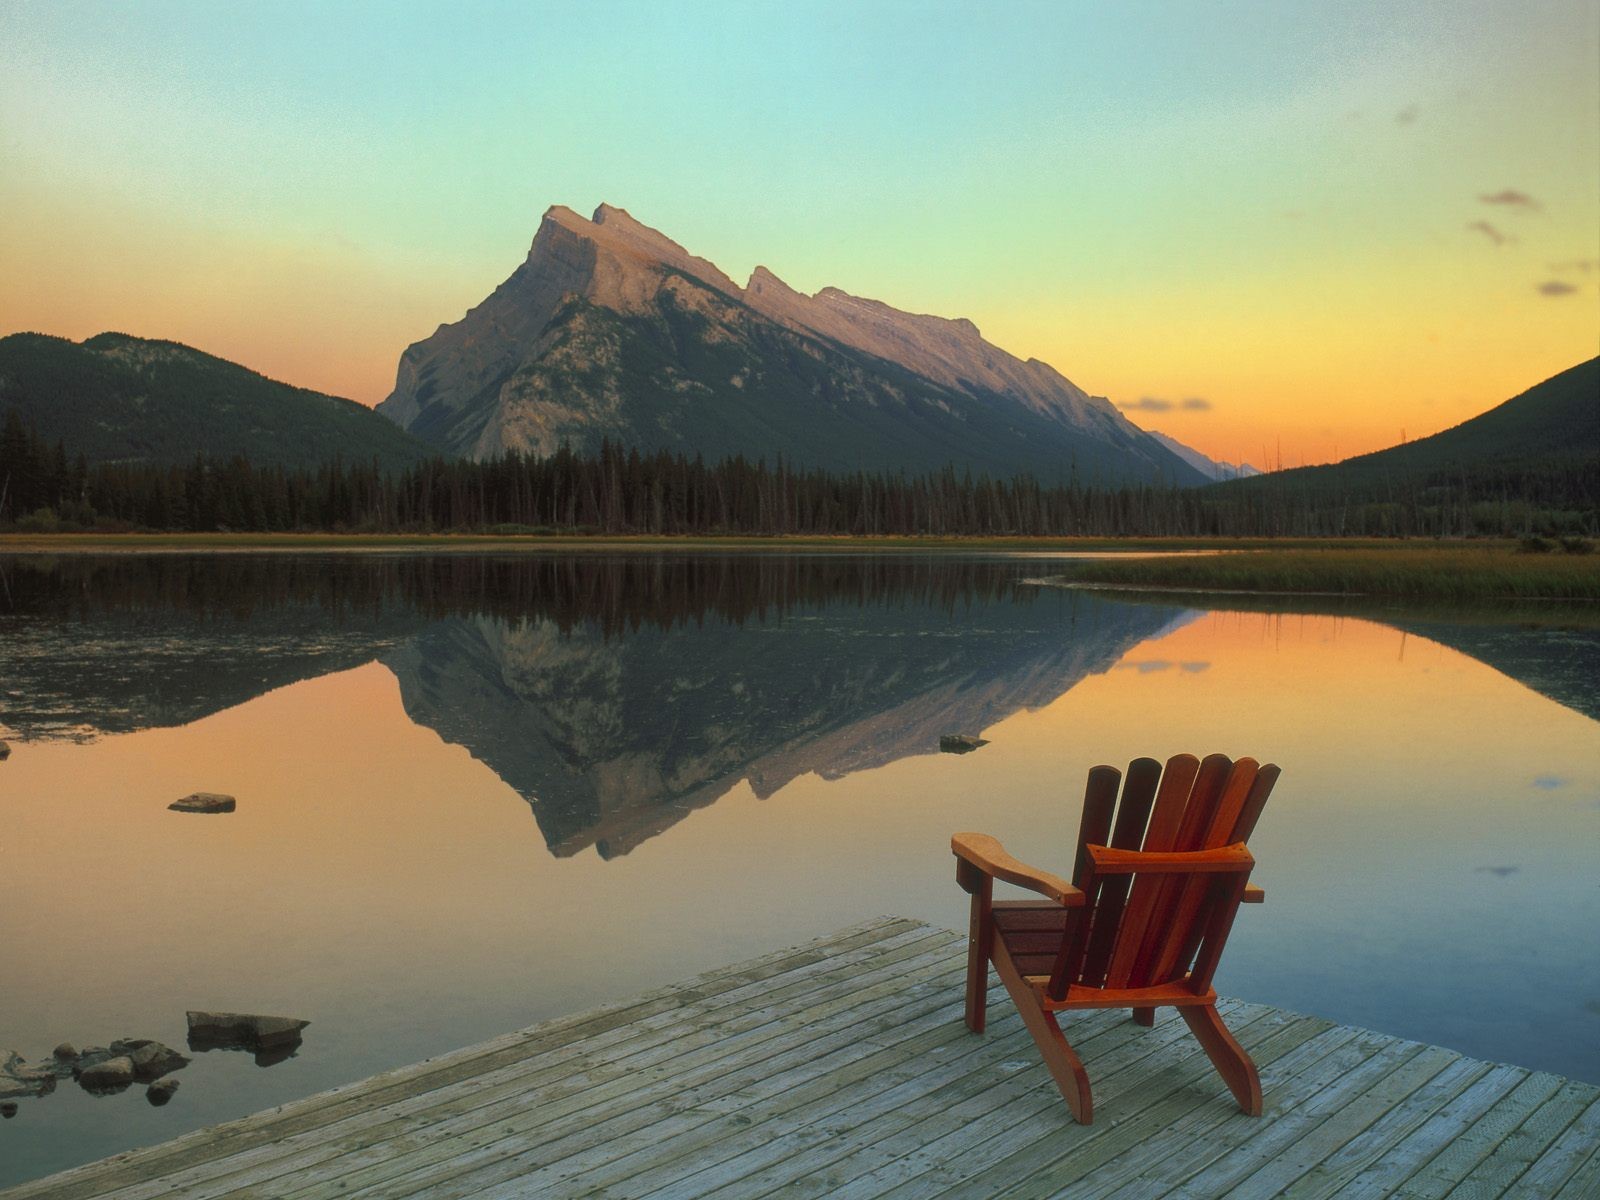 General 1600x1200 mountains lake reflection Banff National Park Canada chair outdoors water